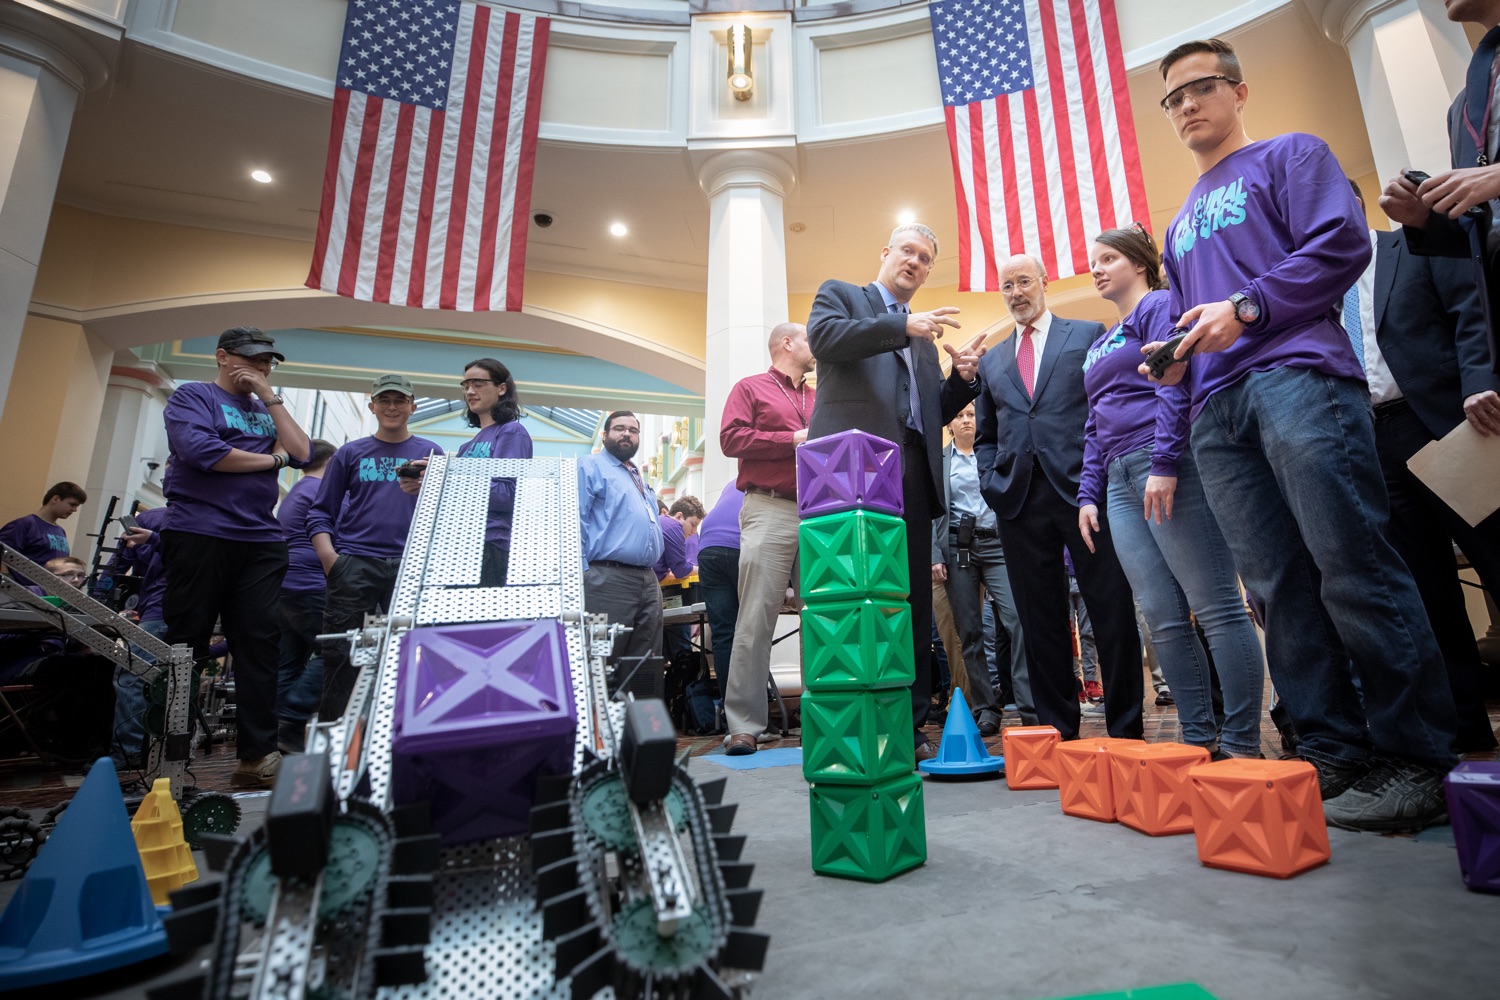 Pennsylvania Governor Tom Wolf meeting with students at the robotics demonstration.Celebrating the success of the PAsmart workforce development program to create educational opportunities at schools across the commonwealth, Governor Tom Wolf welcomed more than 50 students from the Pennsylvania Rural Robotics Initiative to the Capitol today. The students from nine western Pennsylvania school districts showcased their skills in coding, robotics and drone technology. The Wolf administration awarded the initiative a $299,000 PAsmart Advancing Grant earlier this year. Harrisburg, PA  Tuesday, November 12, 2019<br><a href="https://filesource.amperwave.net/commonwealthofpa/photo/17587_gov_pasmart_rural_robotics_dz_023.jpg" target="_blank">⇣ Download Photo</a>